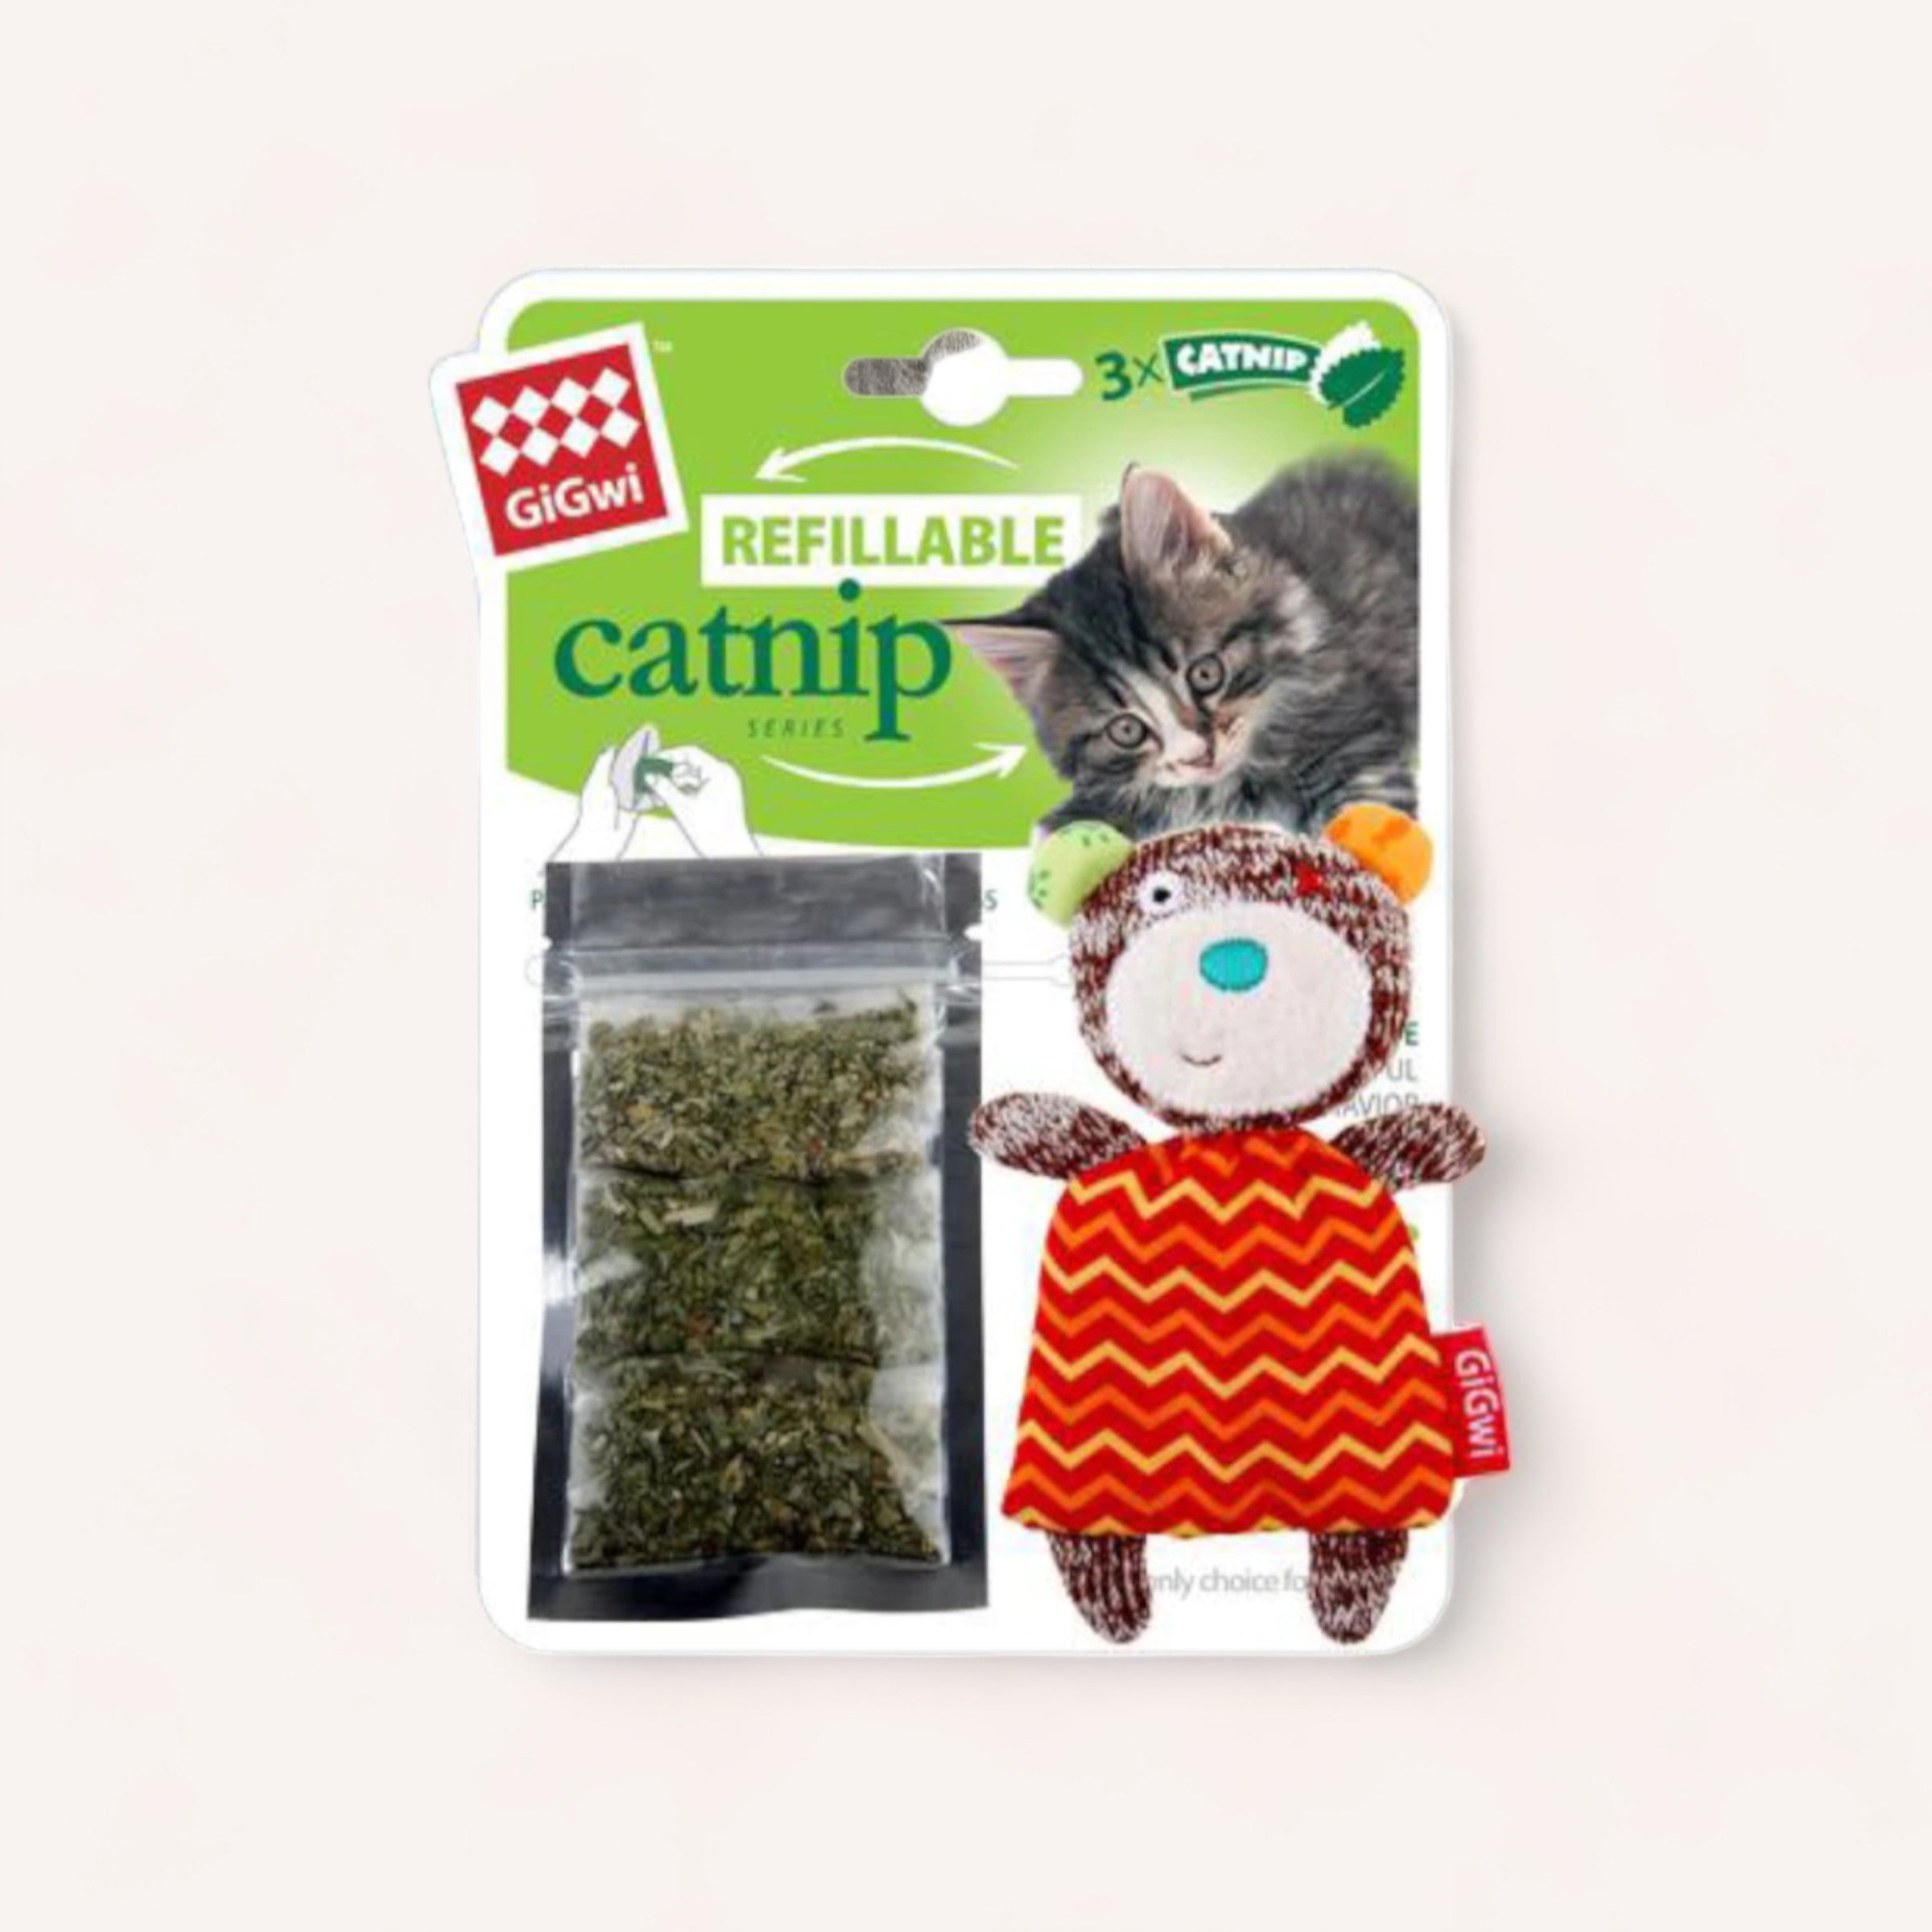 A GiGwi Refillable Catnip Bear toy for felines, featuring a cheerful bear design, accompanied by a refillable pouch of natural catnip leaves to keep your pet entertained and stimulated.